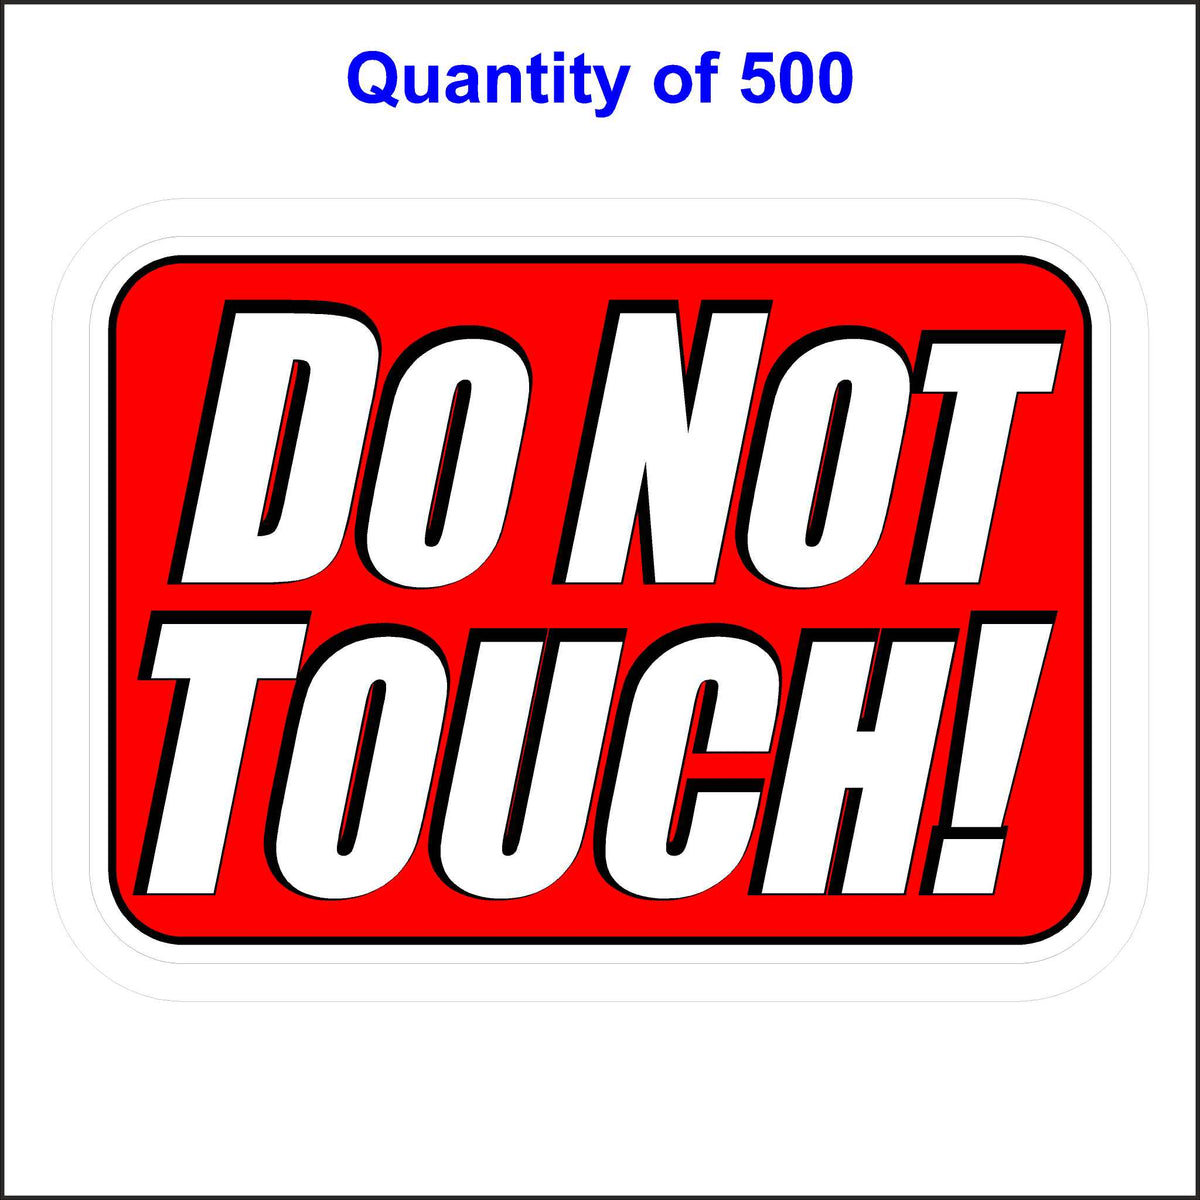 Do Not Touch Sticker With a Red Background and White Letters. 500 Quantity.